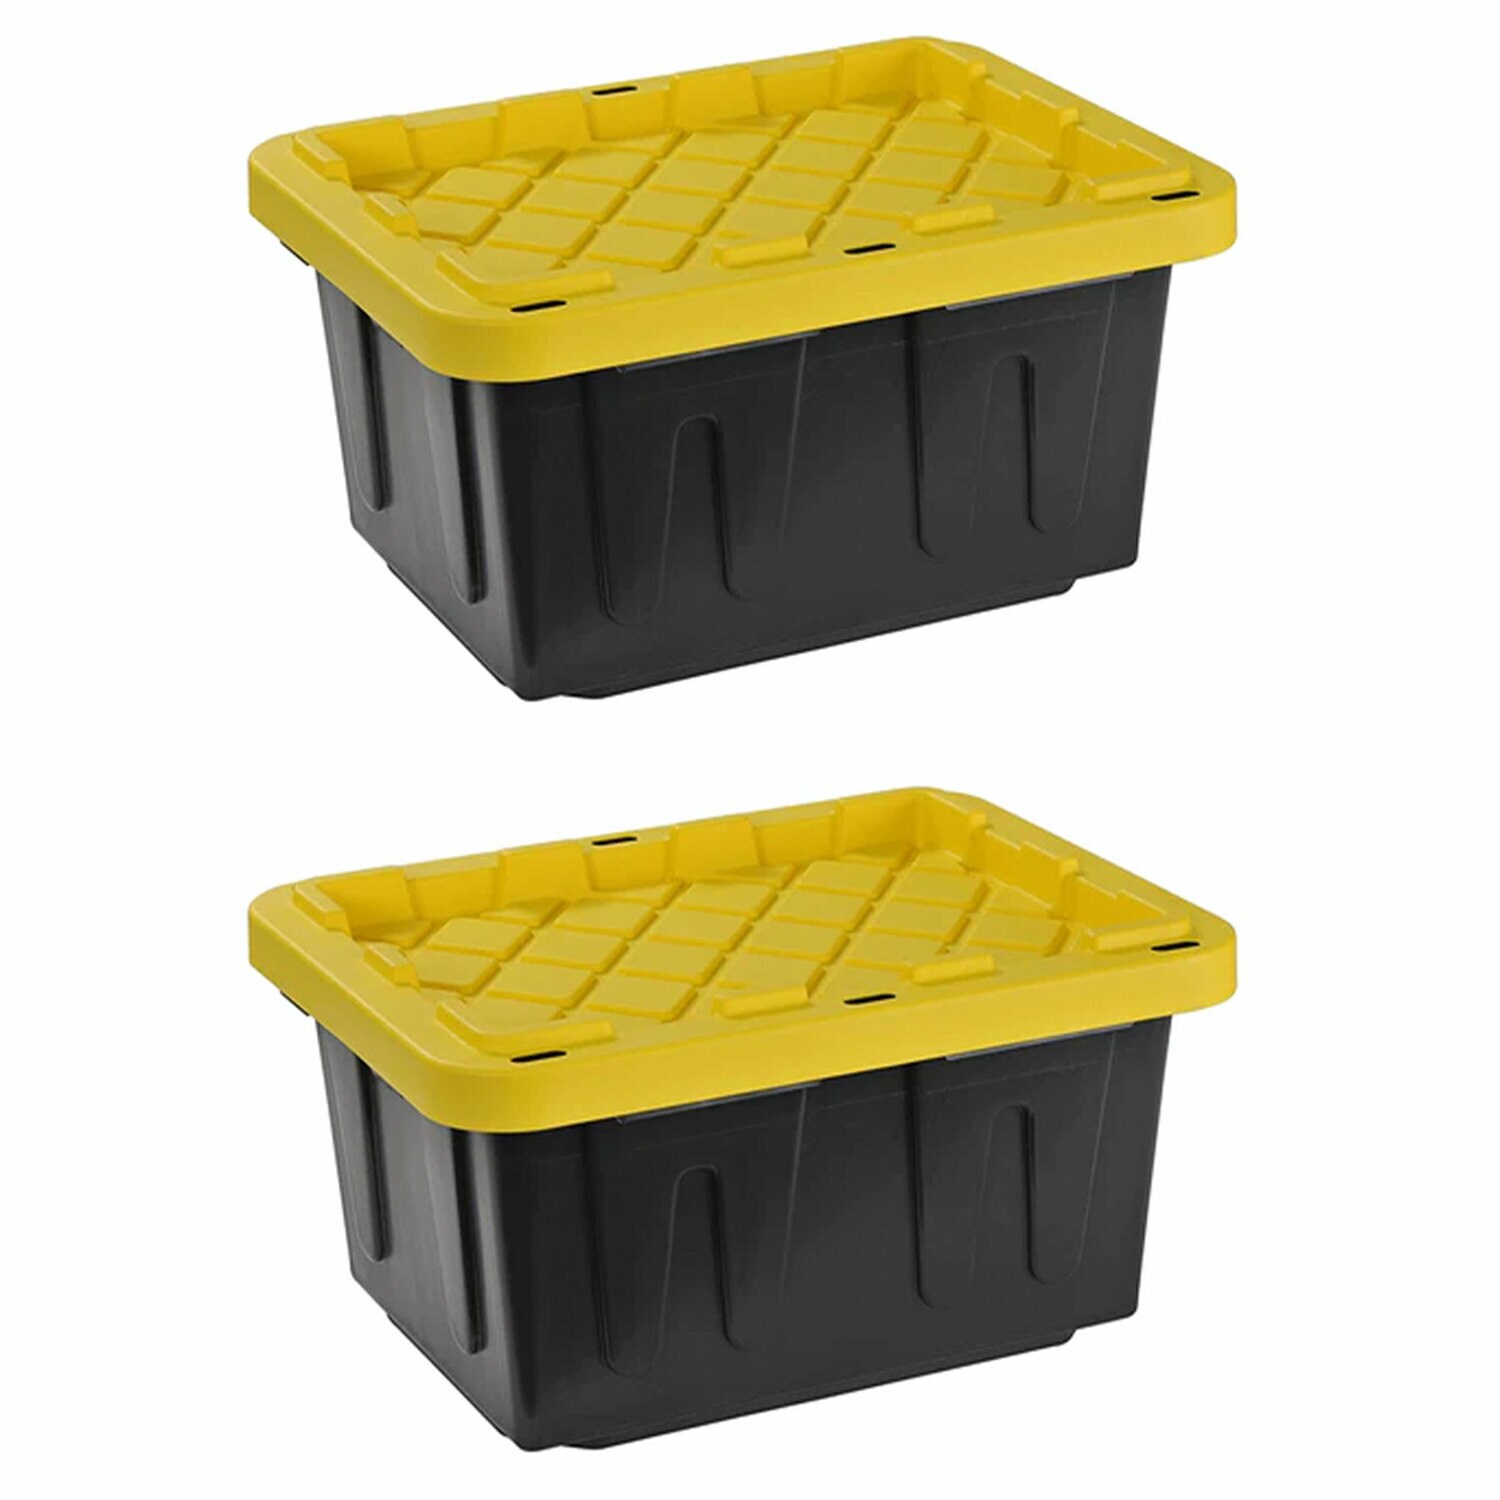 Tote Baskets & Storage Containers at